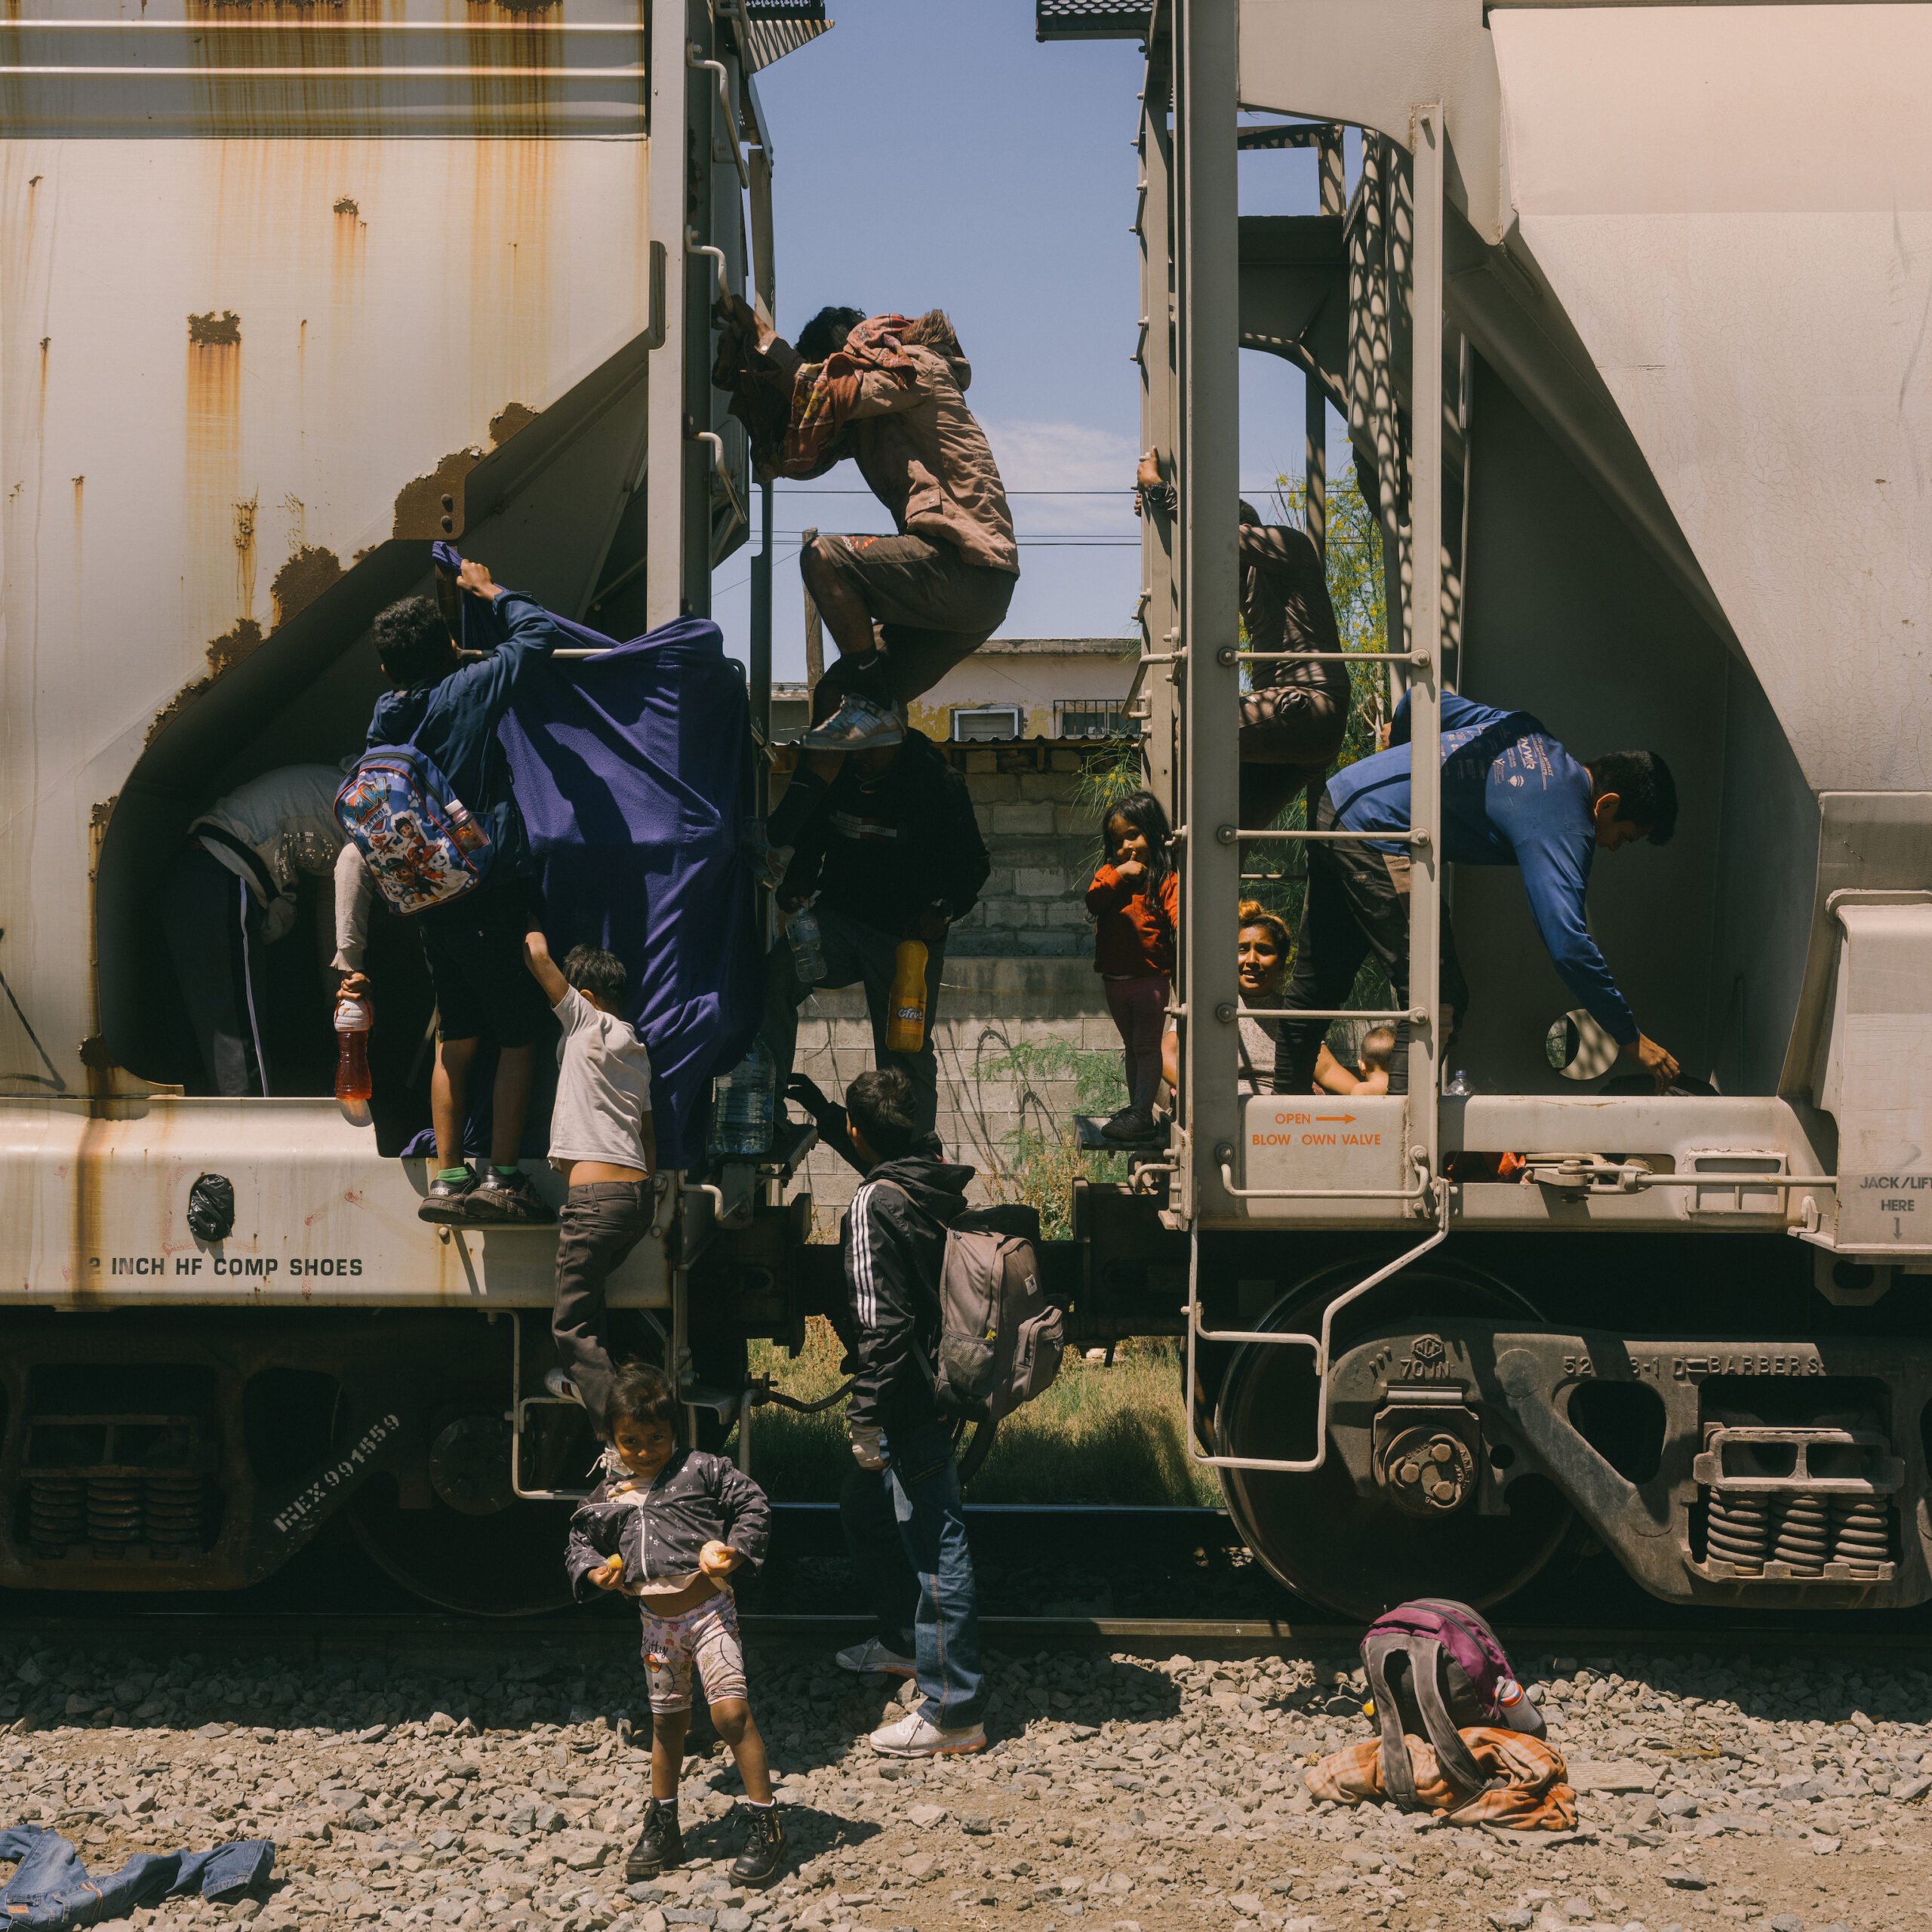 A pair of families photographed in the process of disembarking from their stowaway hiding places aboard La Bestia. A young child stands proudly on the ground while other family members climb or cling to the sides of the train.